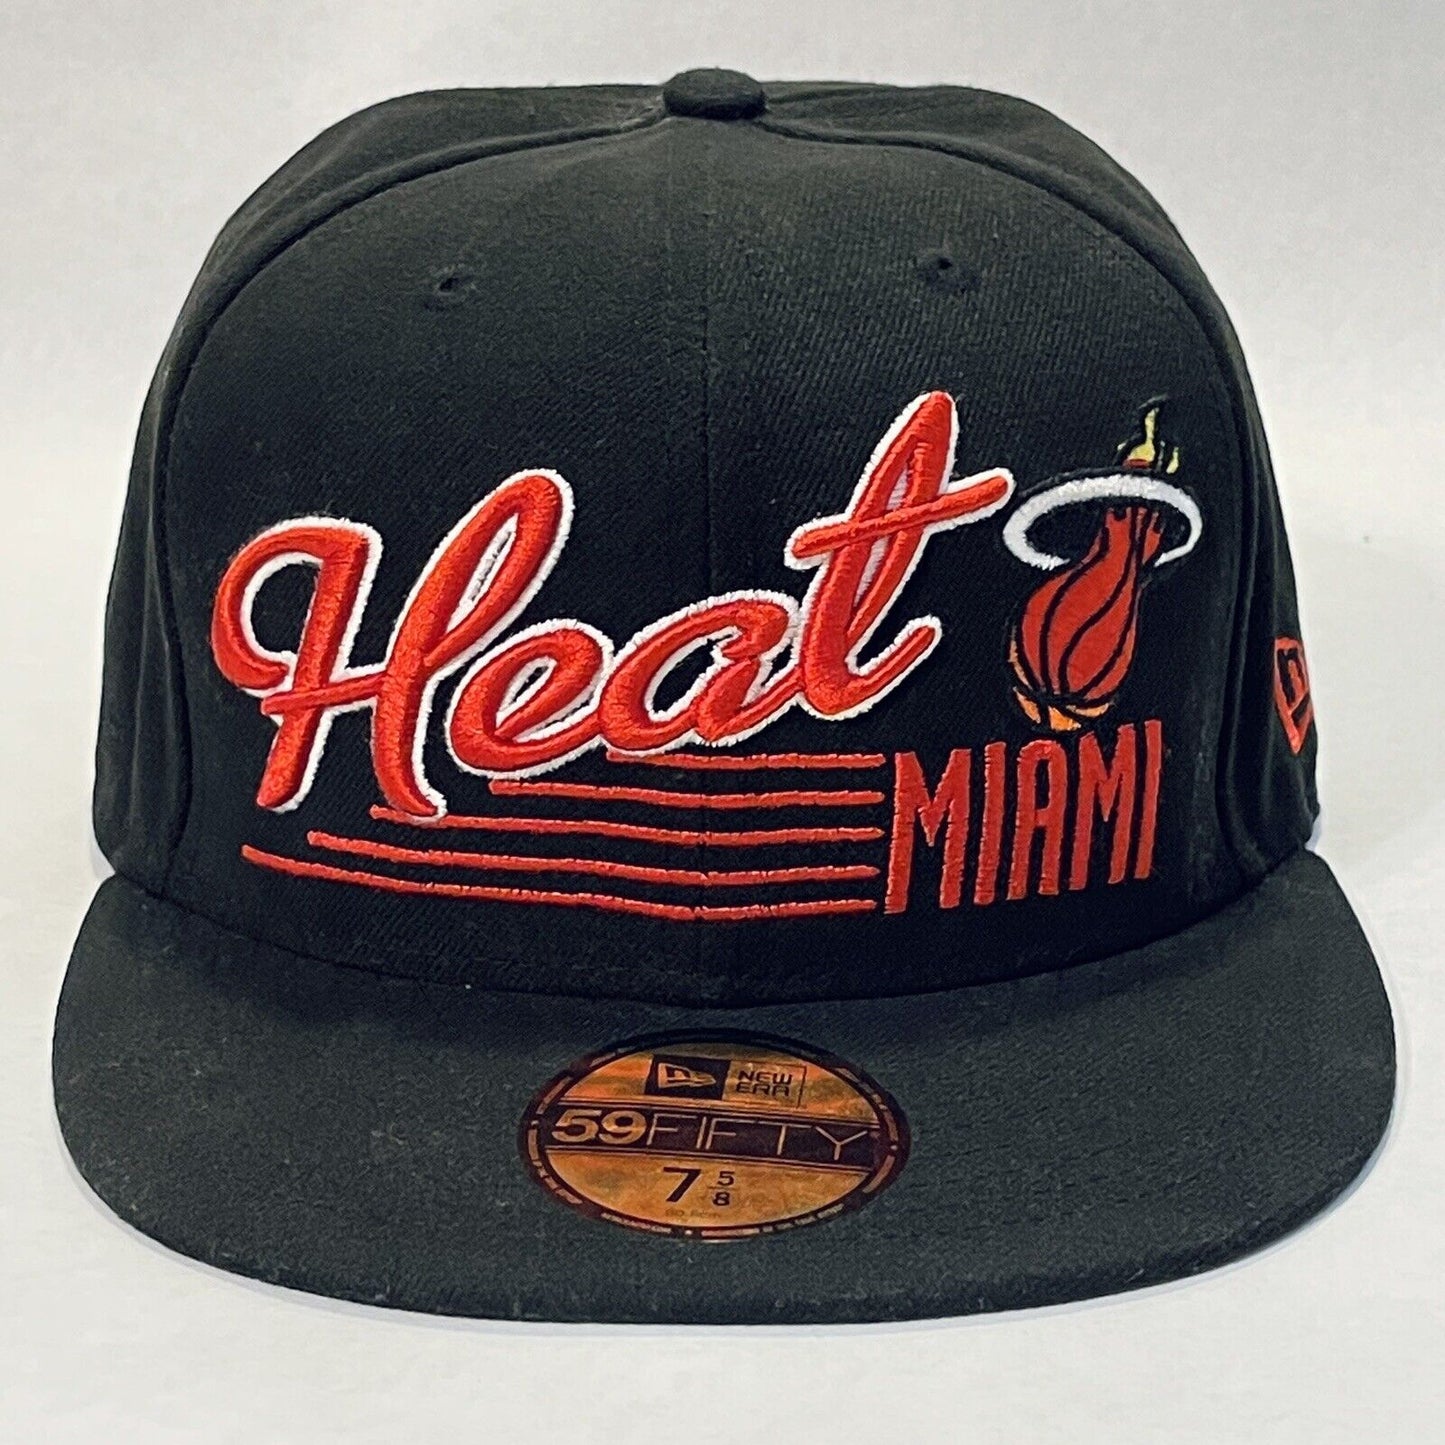 Miami Heat Hat New Era 9FIFTY Fitted Cap 7 5/8 Black Red NBA Basketball Mens